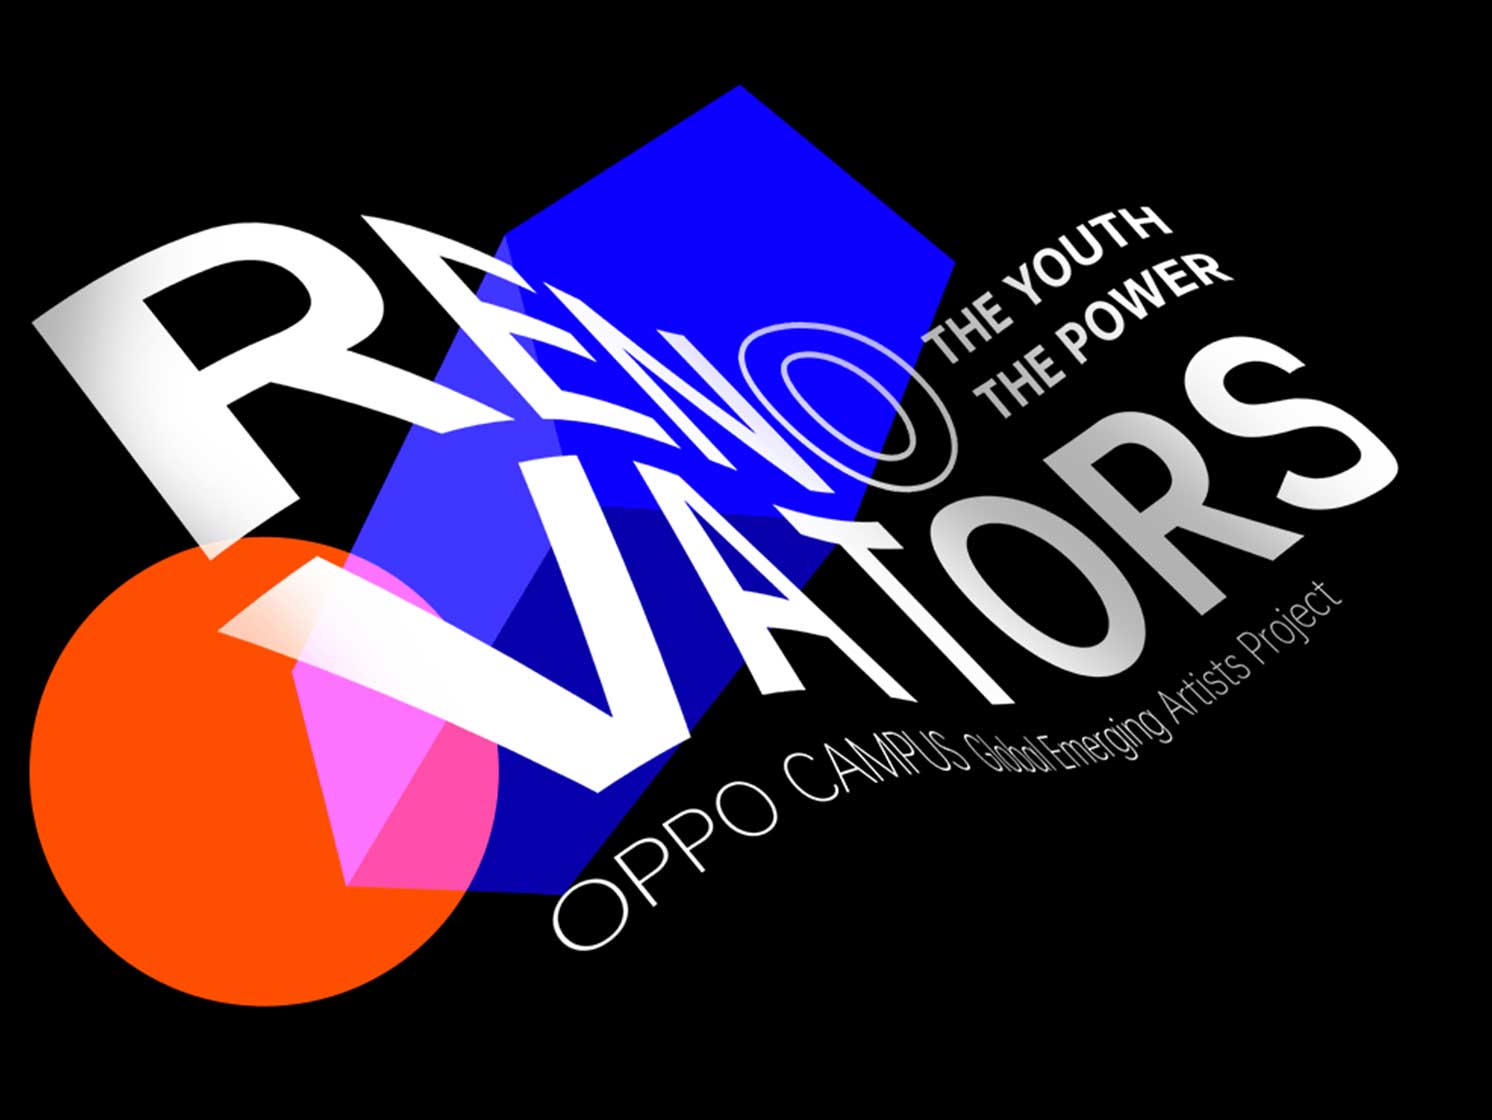 OPPO Announces the second season of the OPPO CAMPUS Global Emerging Artists Project Renovators.